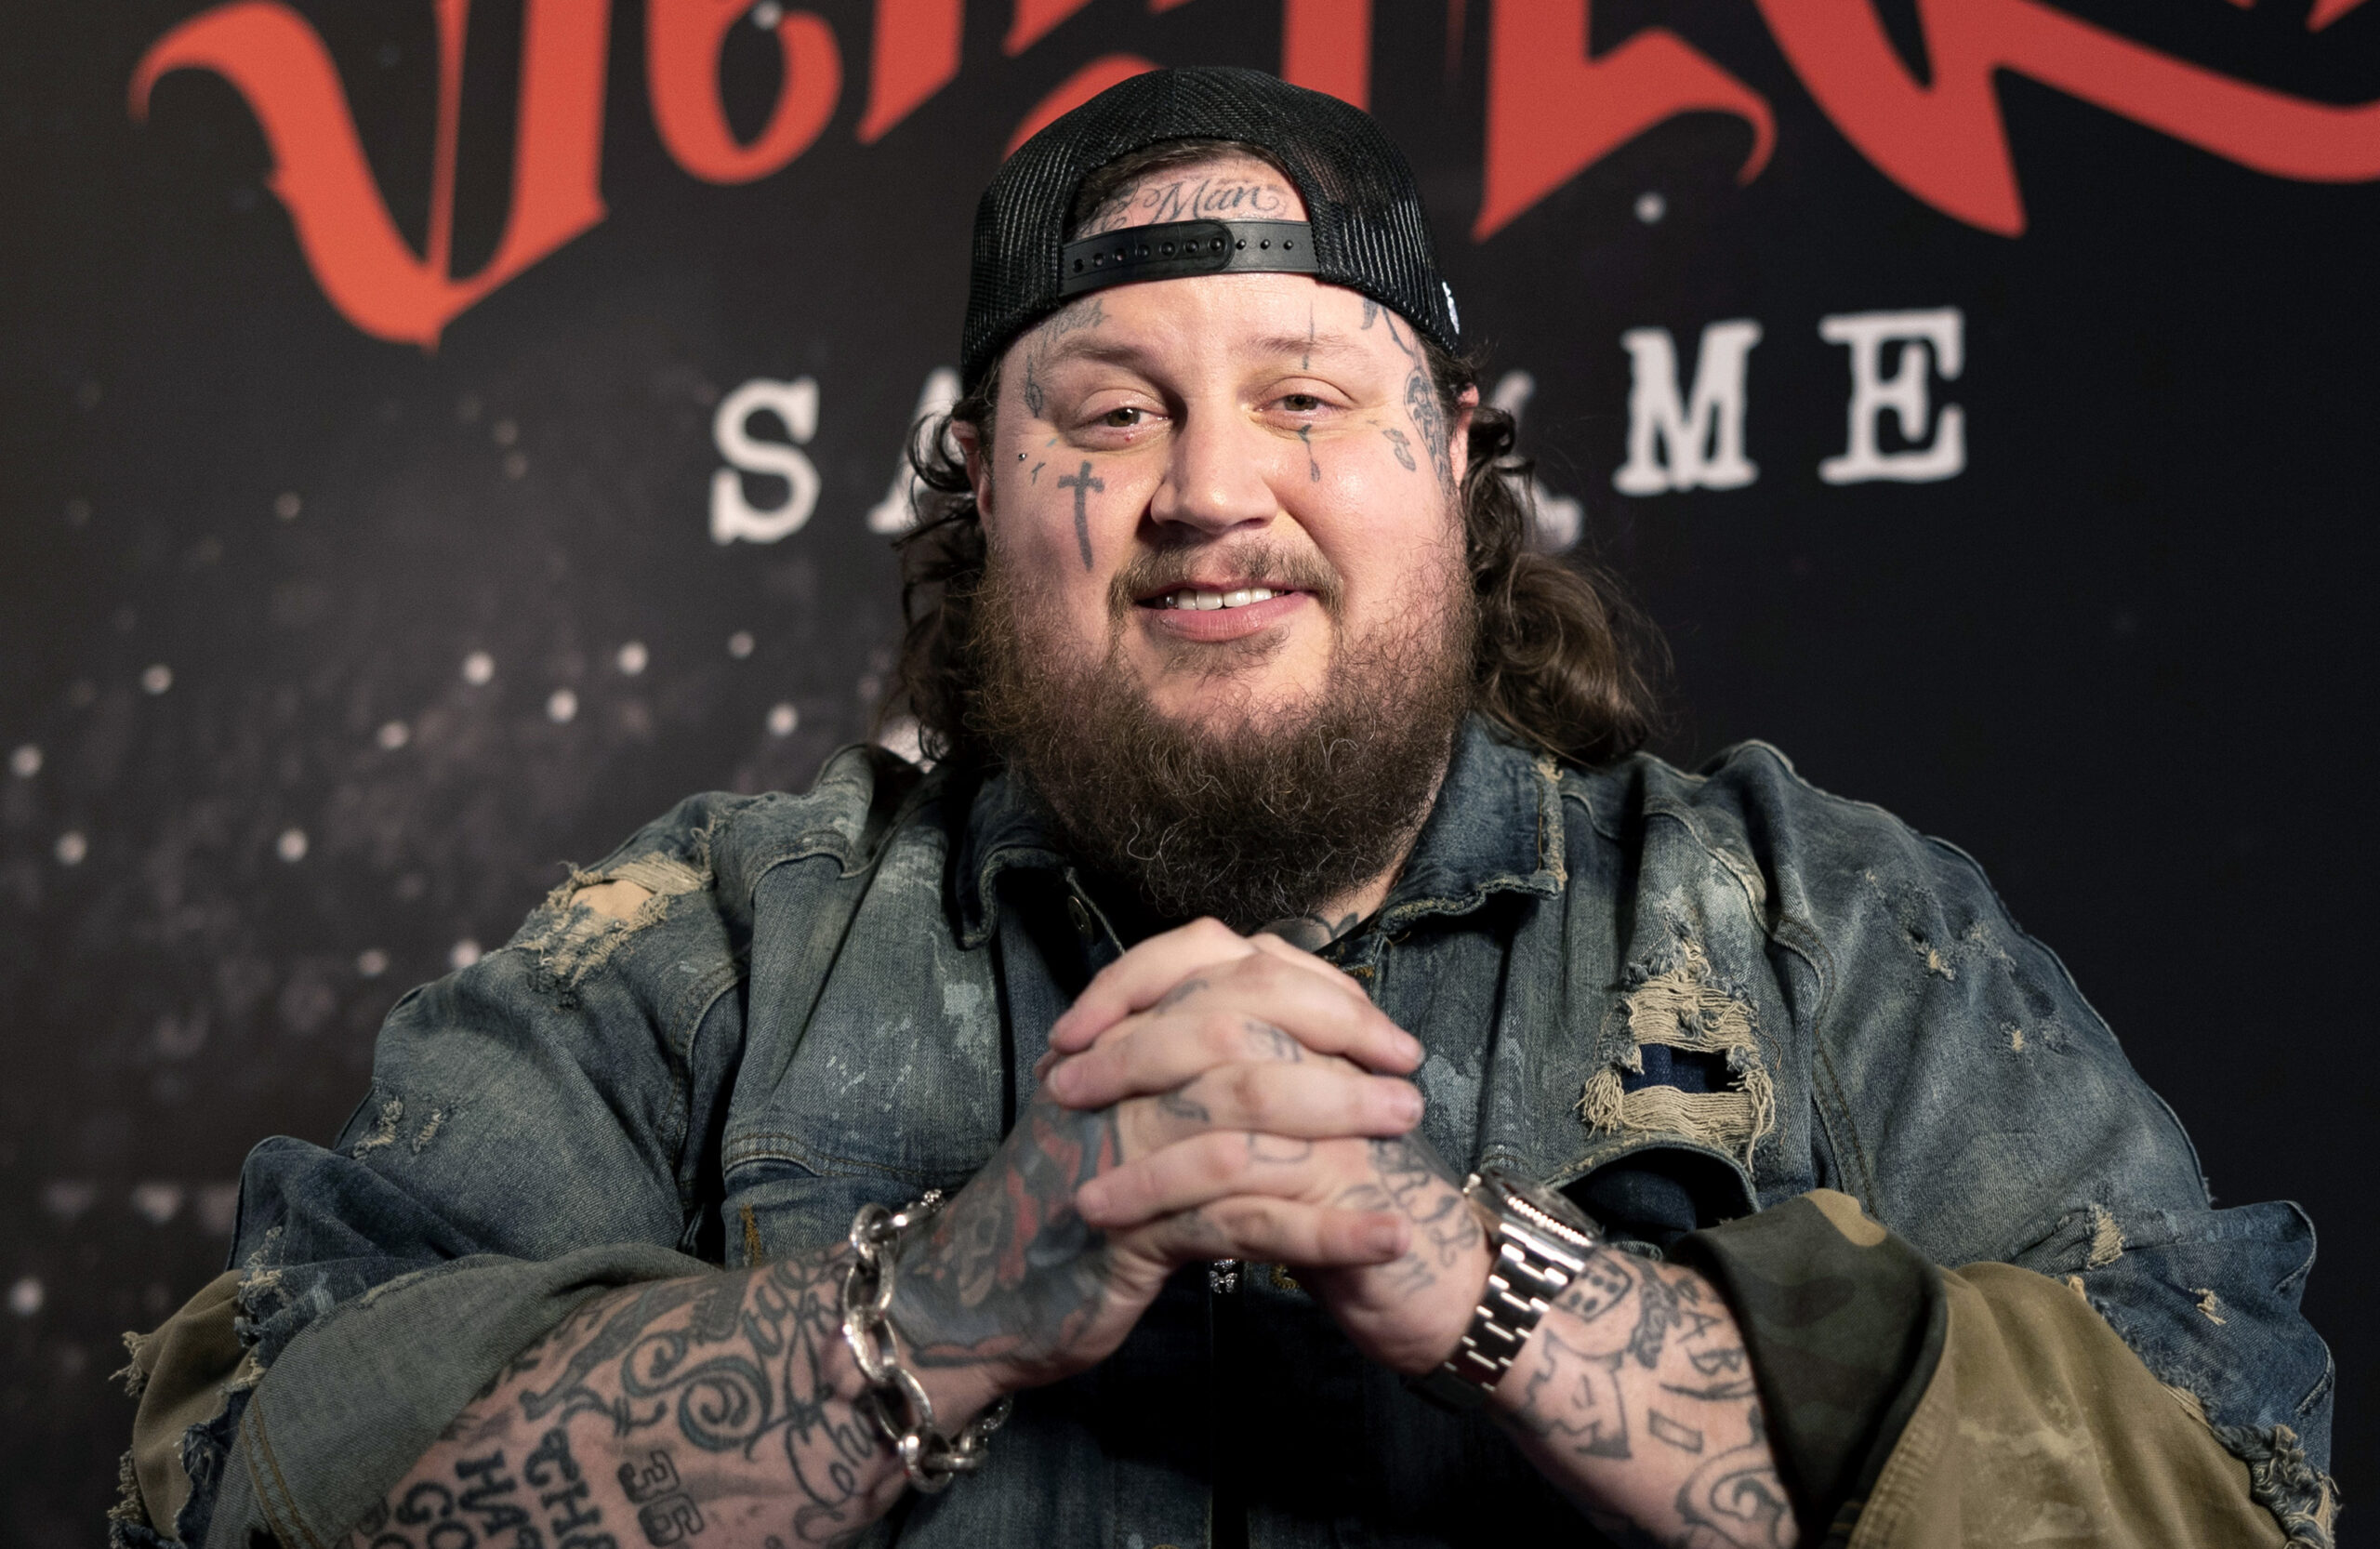 Jelly Roll Expresses Tattoo Regret, Cites Staph Infections as Consequence